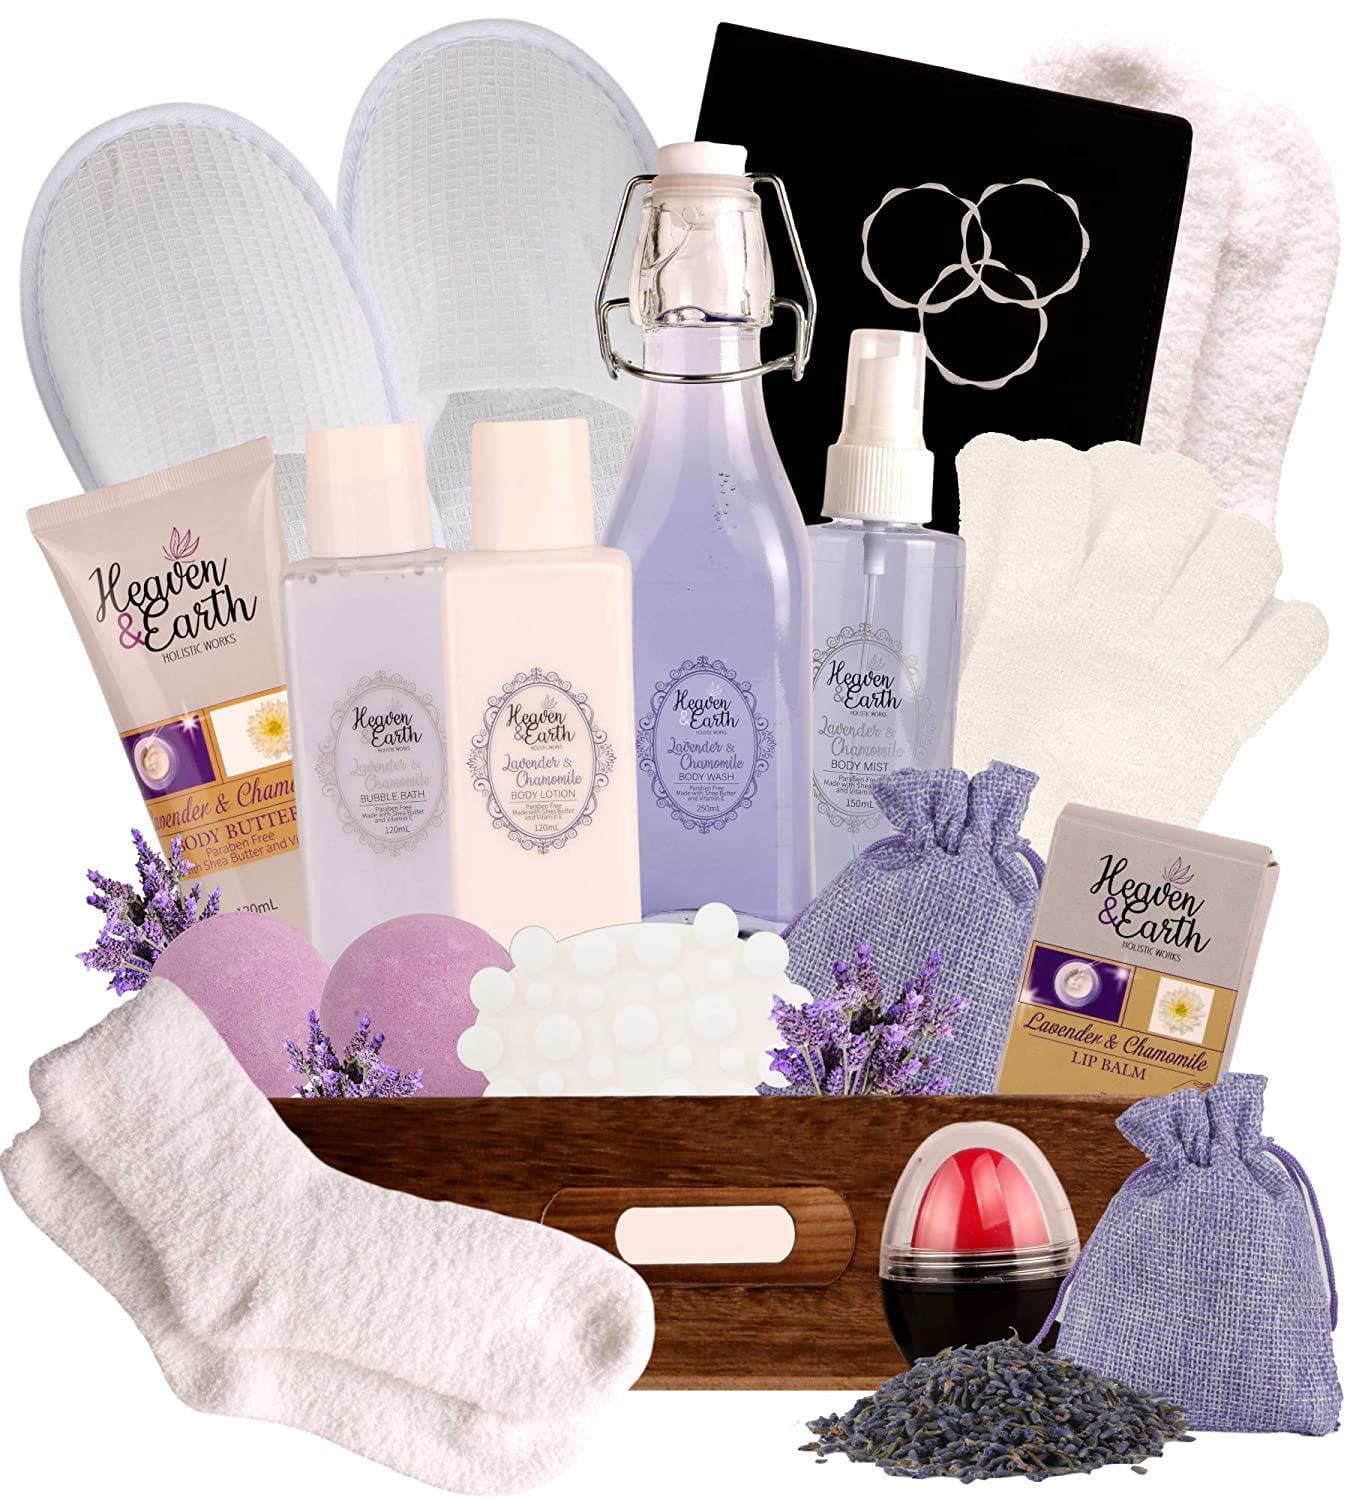  Birthday Gifts Set for Mom, Personalized Spa Body Relaxing  Lavender Gifts Basket, Mothers Day Gifts From Daughter, Son, Bonus Mom-  Care Gifts Ideas for Mom : Home & Kitchen